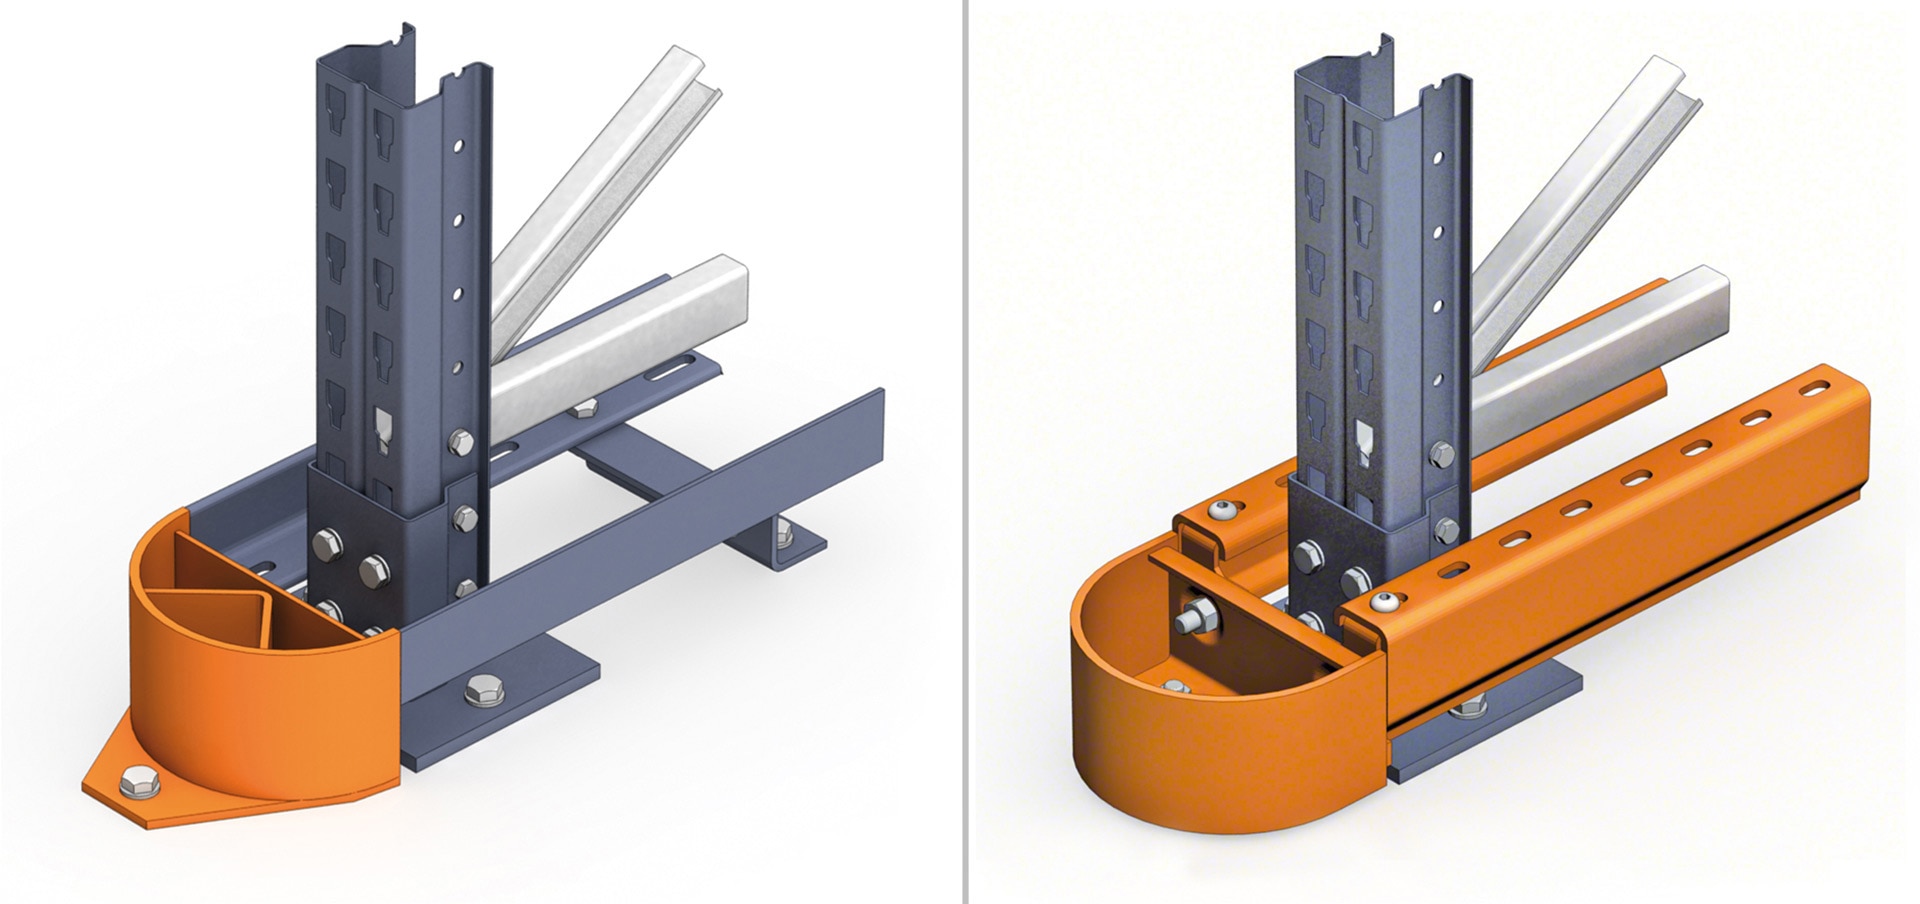 In drive-in racks, the guides minimise the risk of damage to the structure